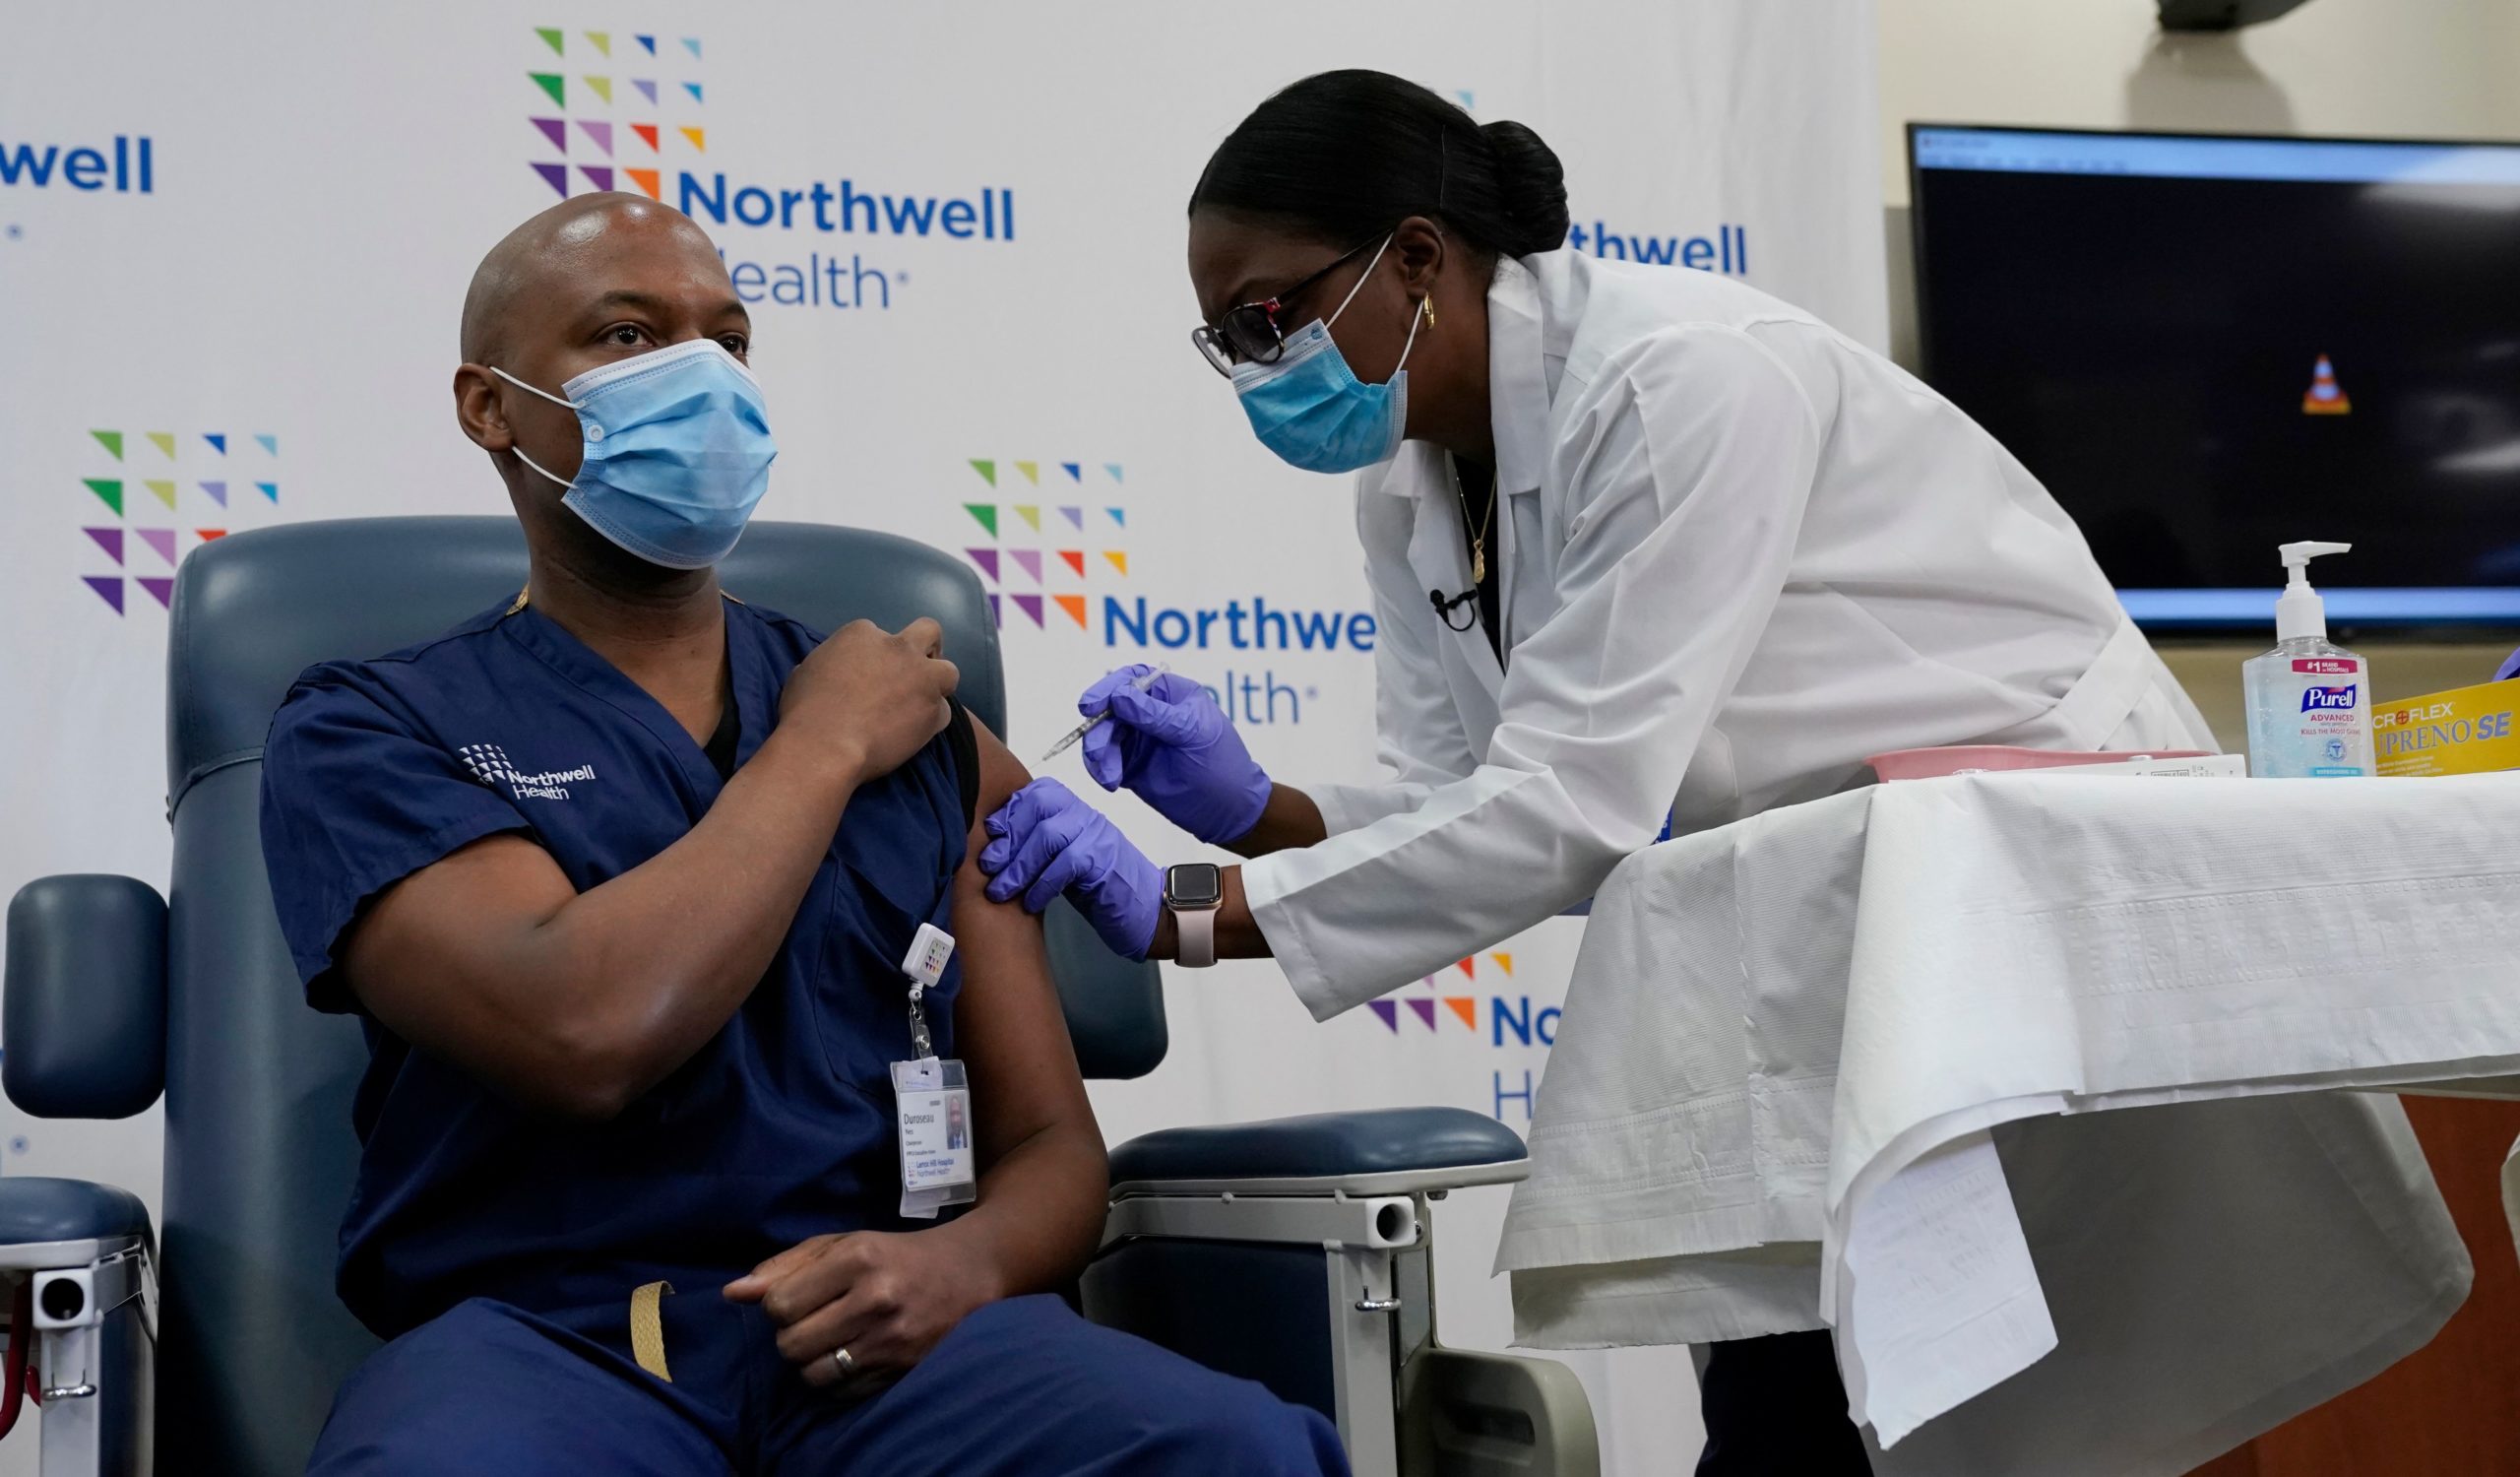 A New York hospital begins administering the Pfizer coronavirus vaccine Monday. (Timothy Clary/AFP via Getty Images)